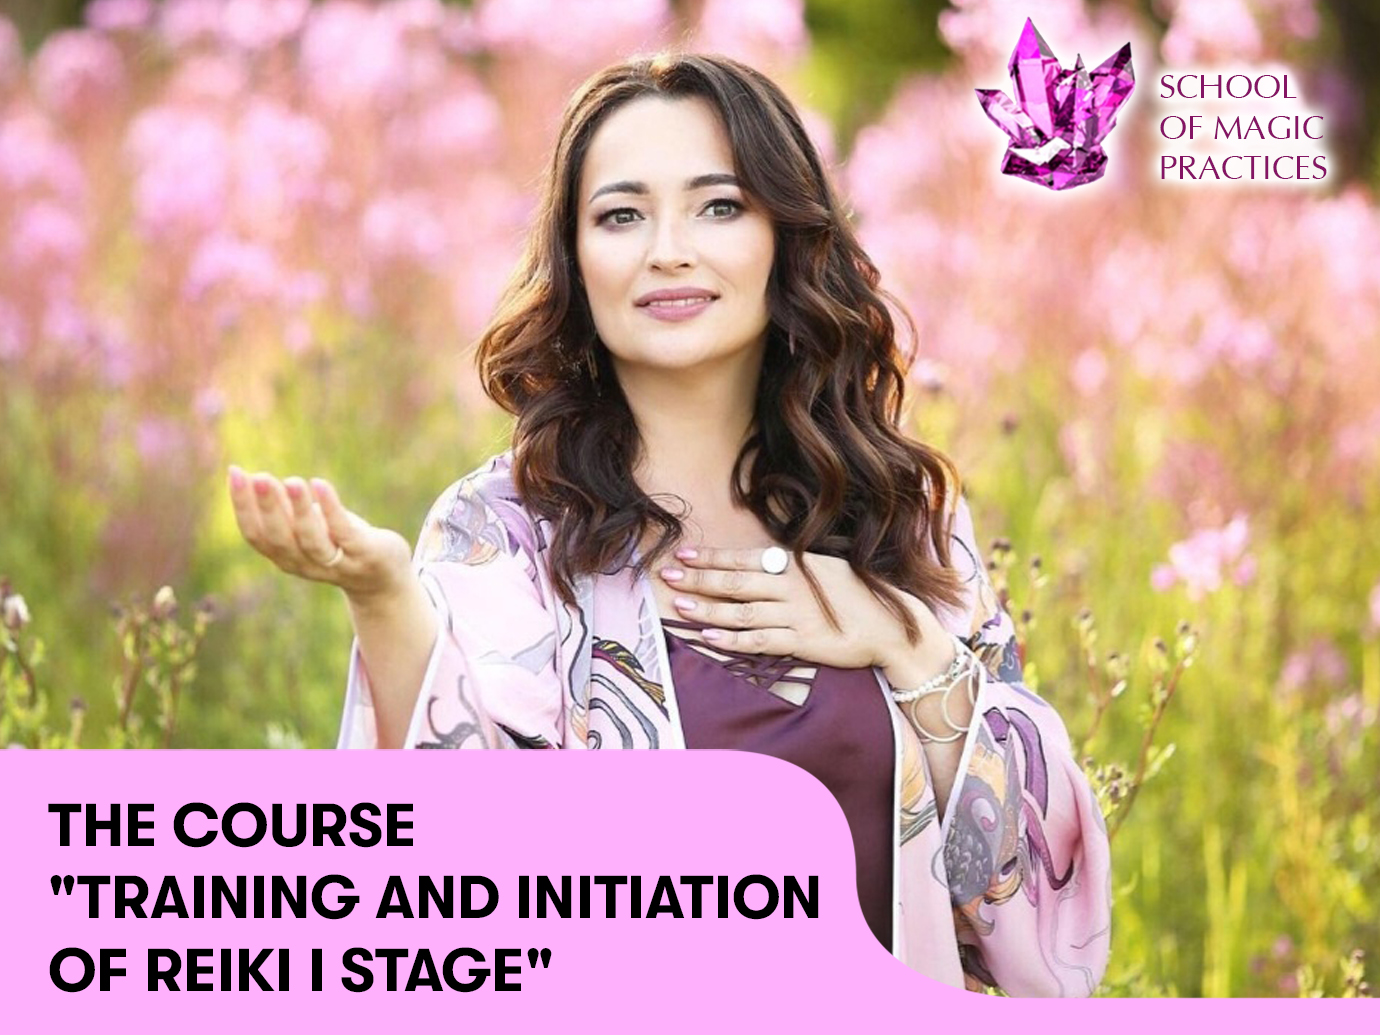 The course “Training and initiation of Reiki I stage“